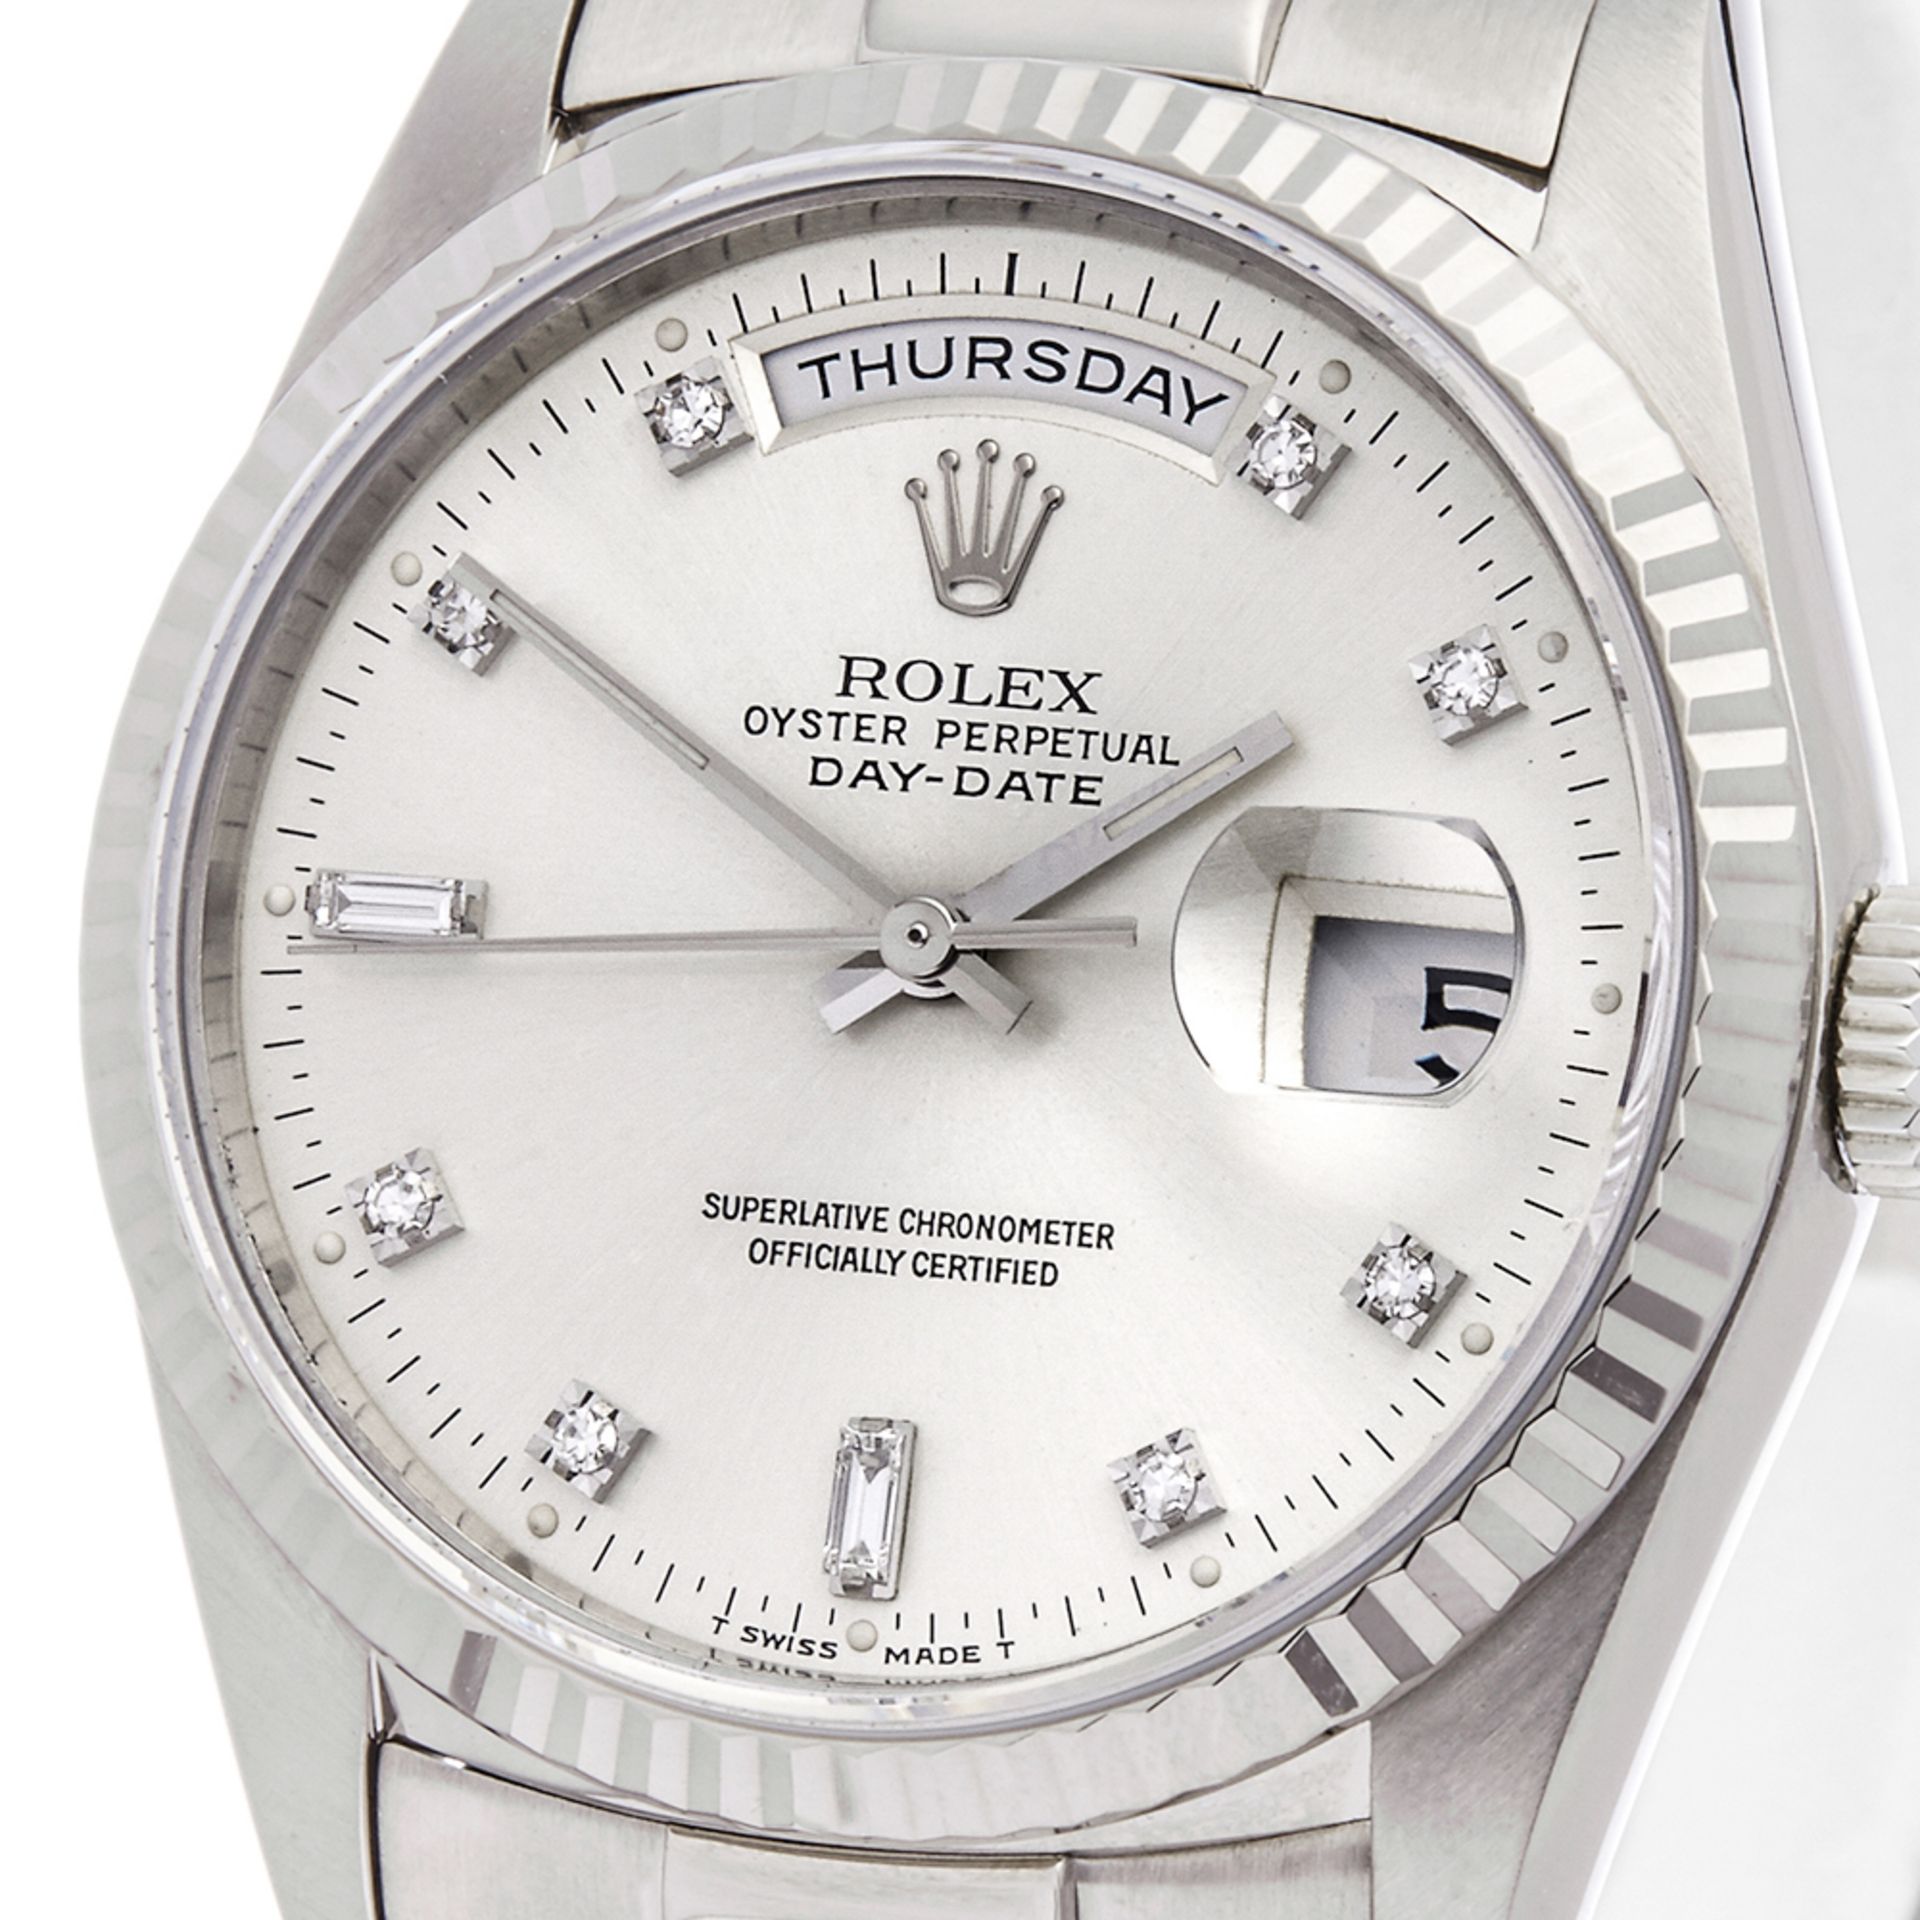 Rolex Day-Date 36mm 18k White Gold - 18239 - Image 3 of 7